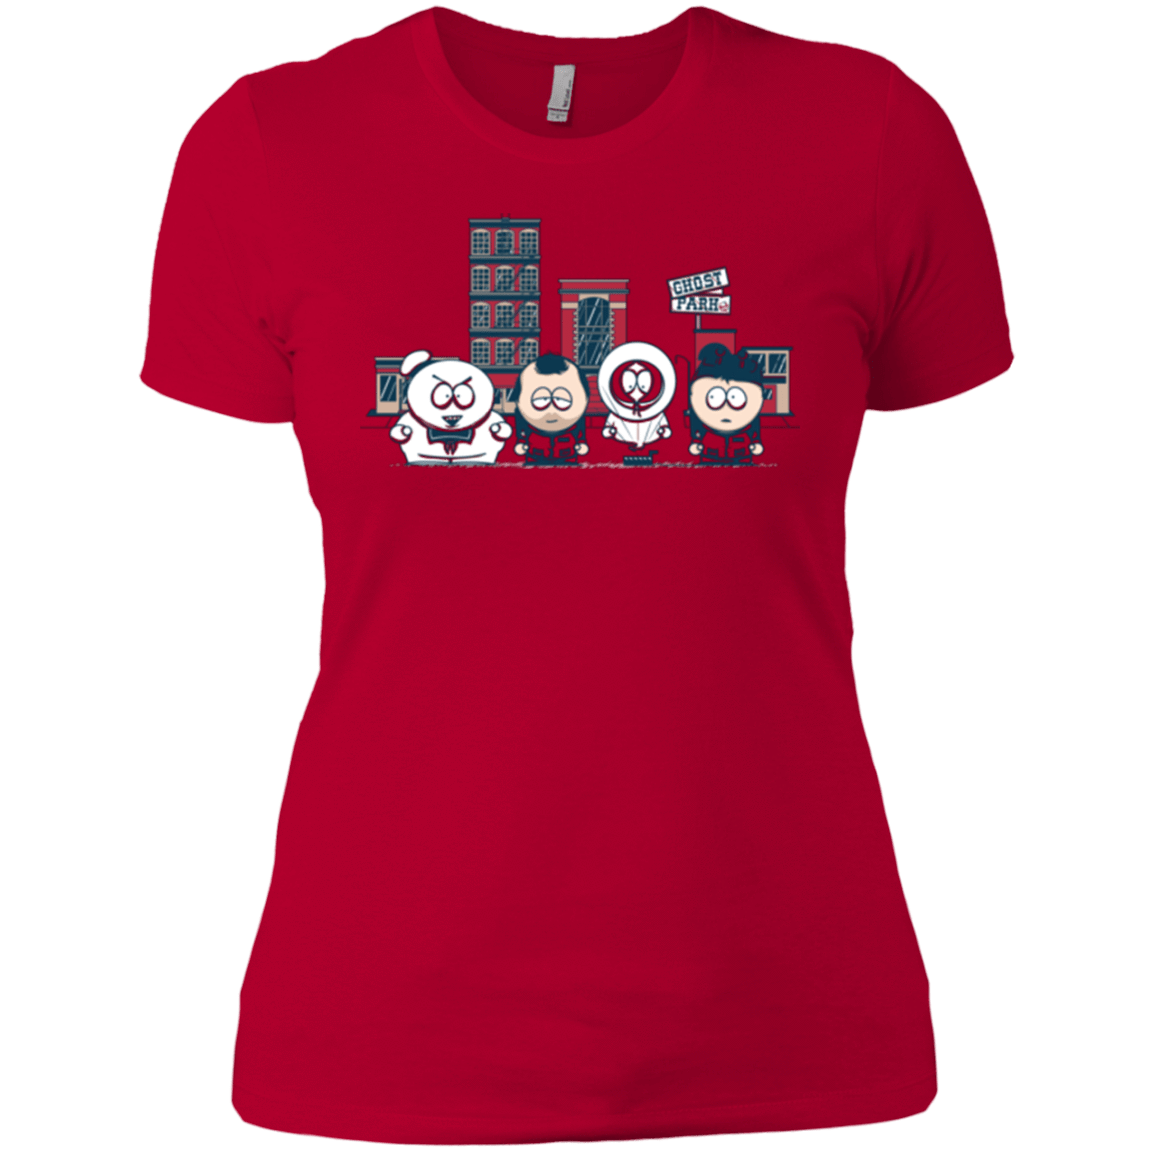 T-Shirts Red / X-Small GHOST PARK Women's Premium T-Shirt